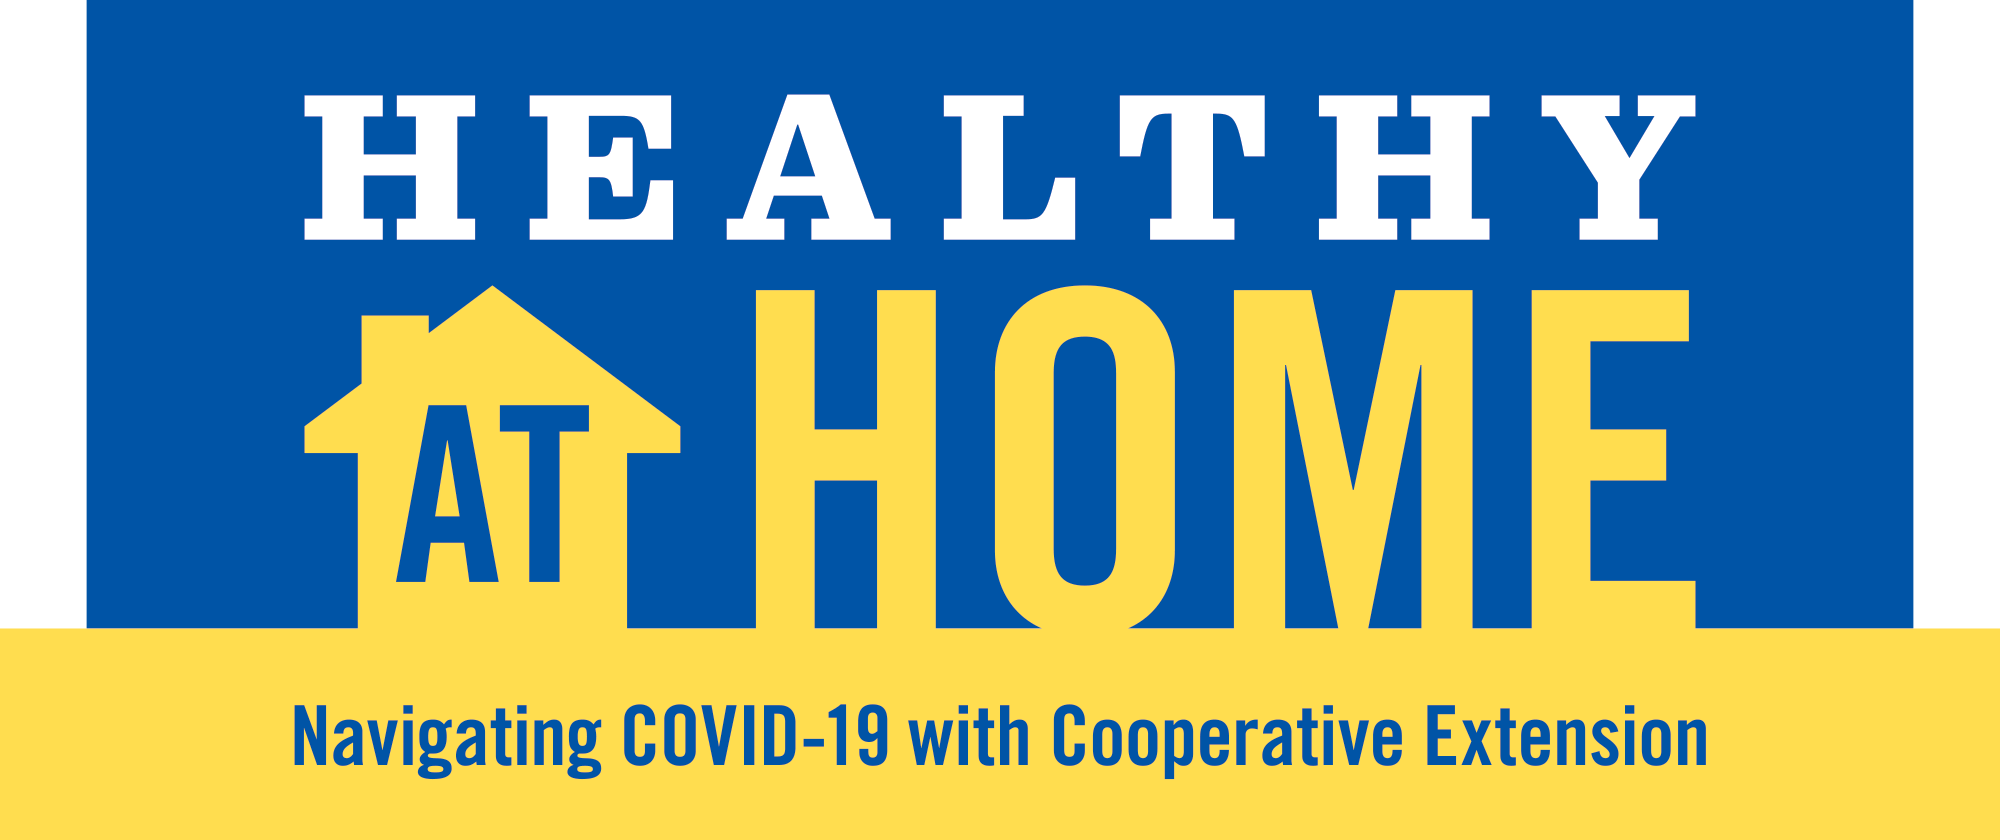 Healthy At Home Lead Graphic with words: Healthy at Home: Navigating COVID-19 With Cooperative Extension